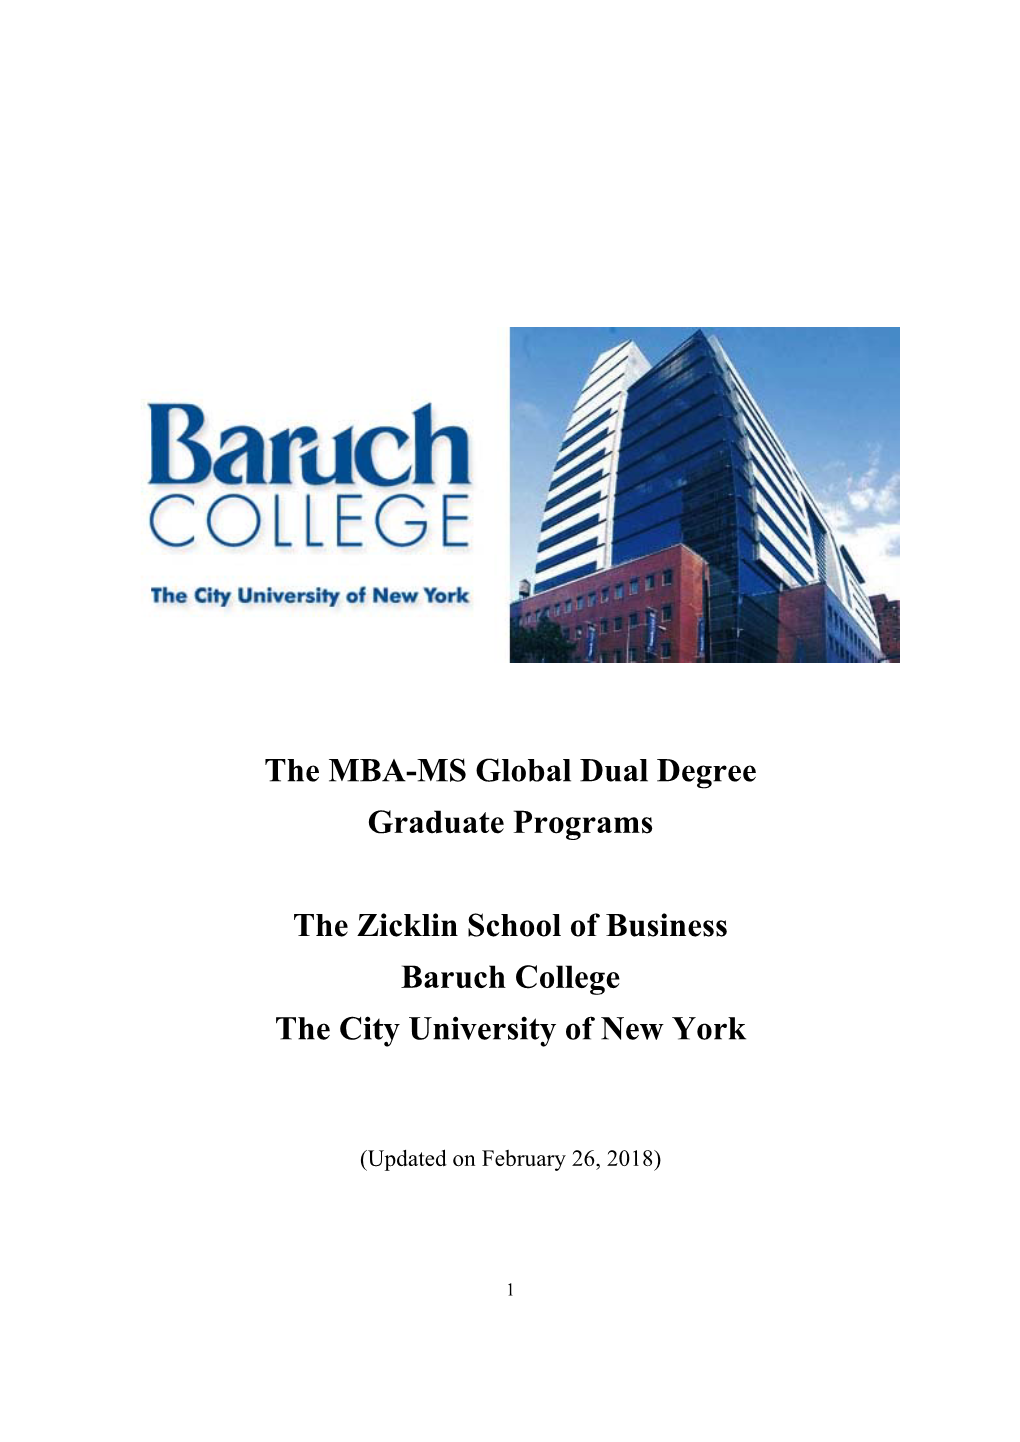 The MBA-MS Global Dual Degree Graduate Programs the Zicklin